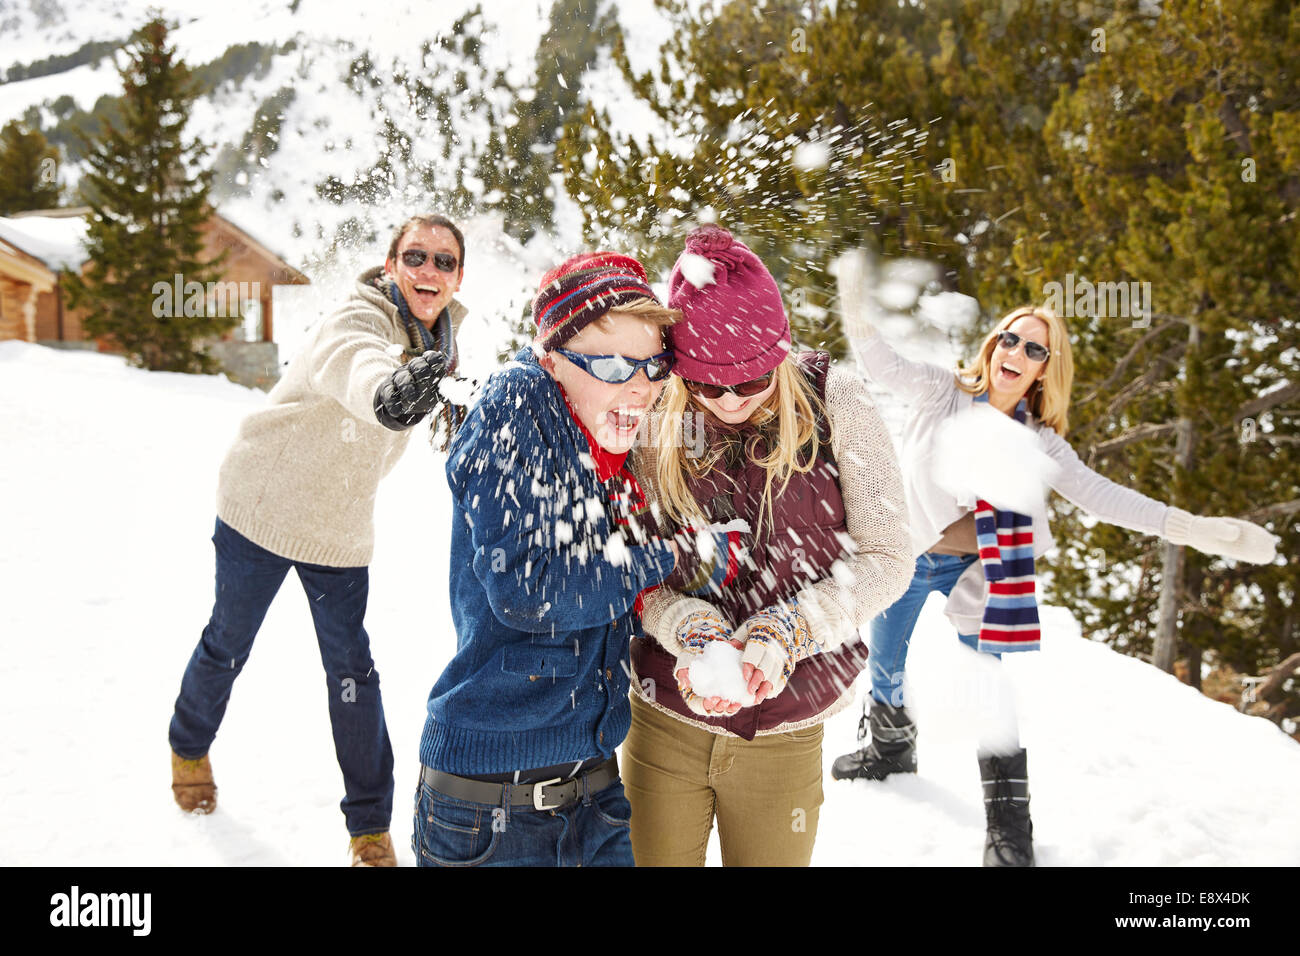 Family having snowball fight together Stock Photo